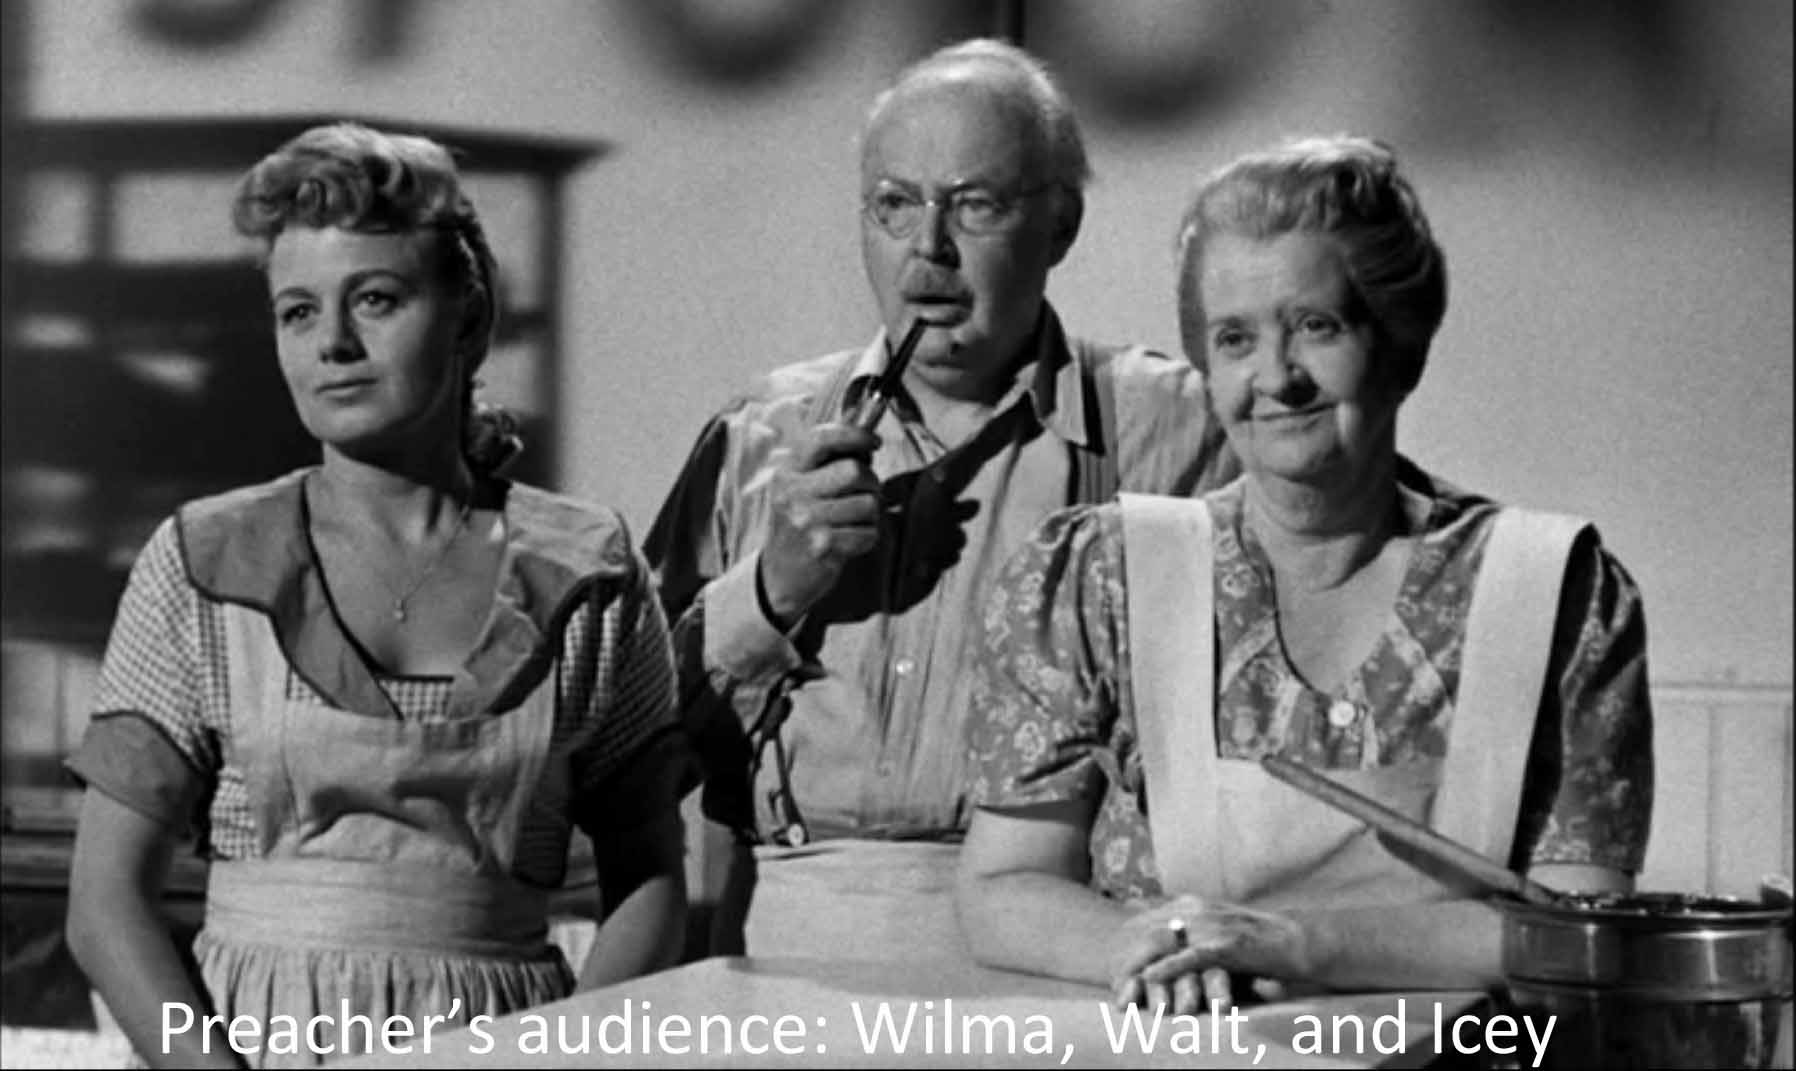 Preacher's audience: Wilma, Walt, and Icey